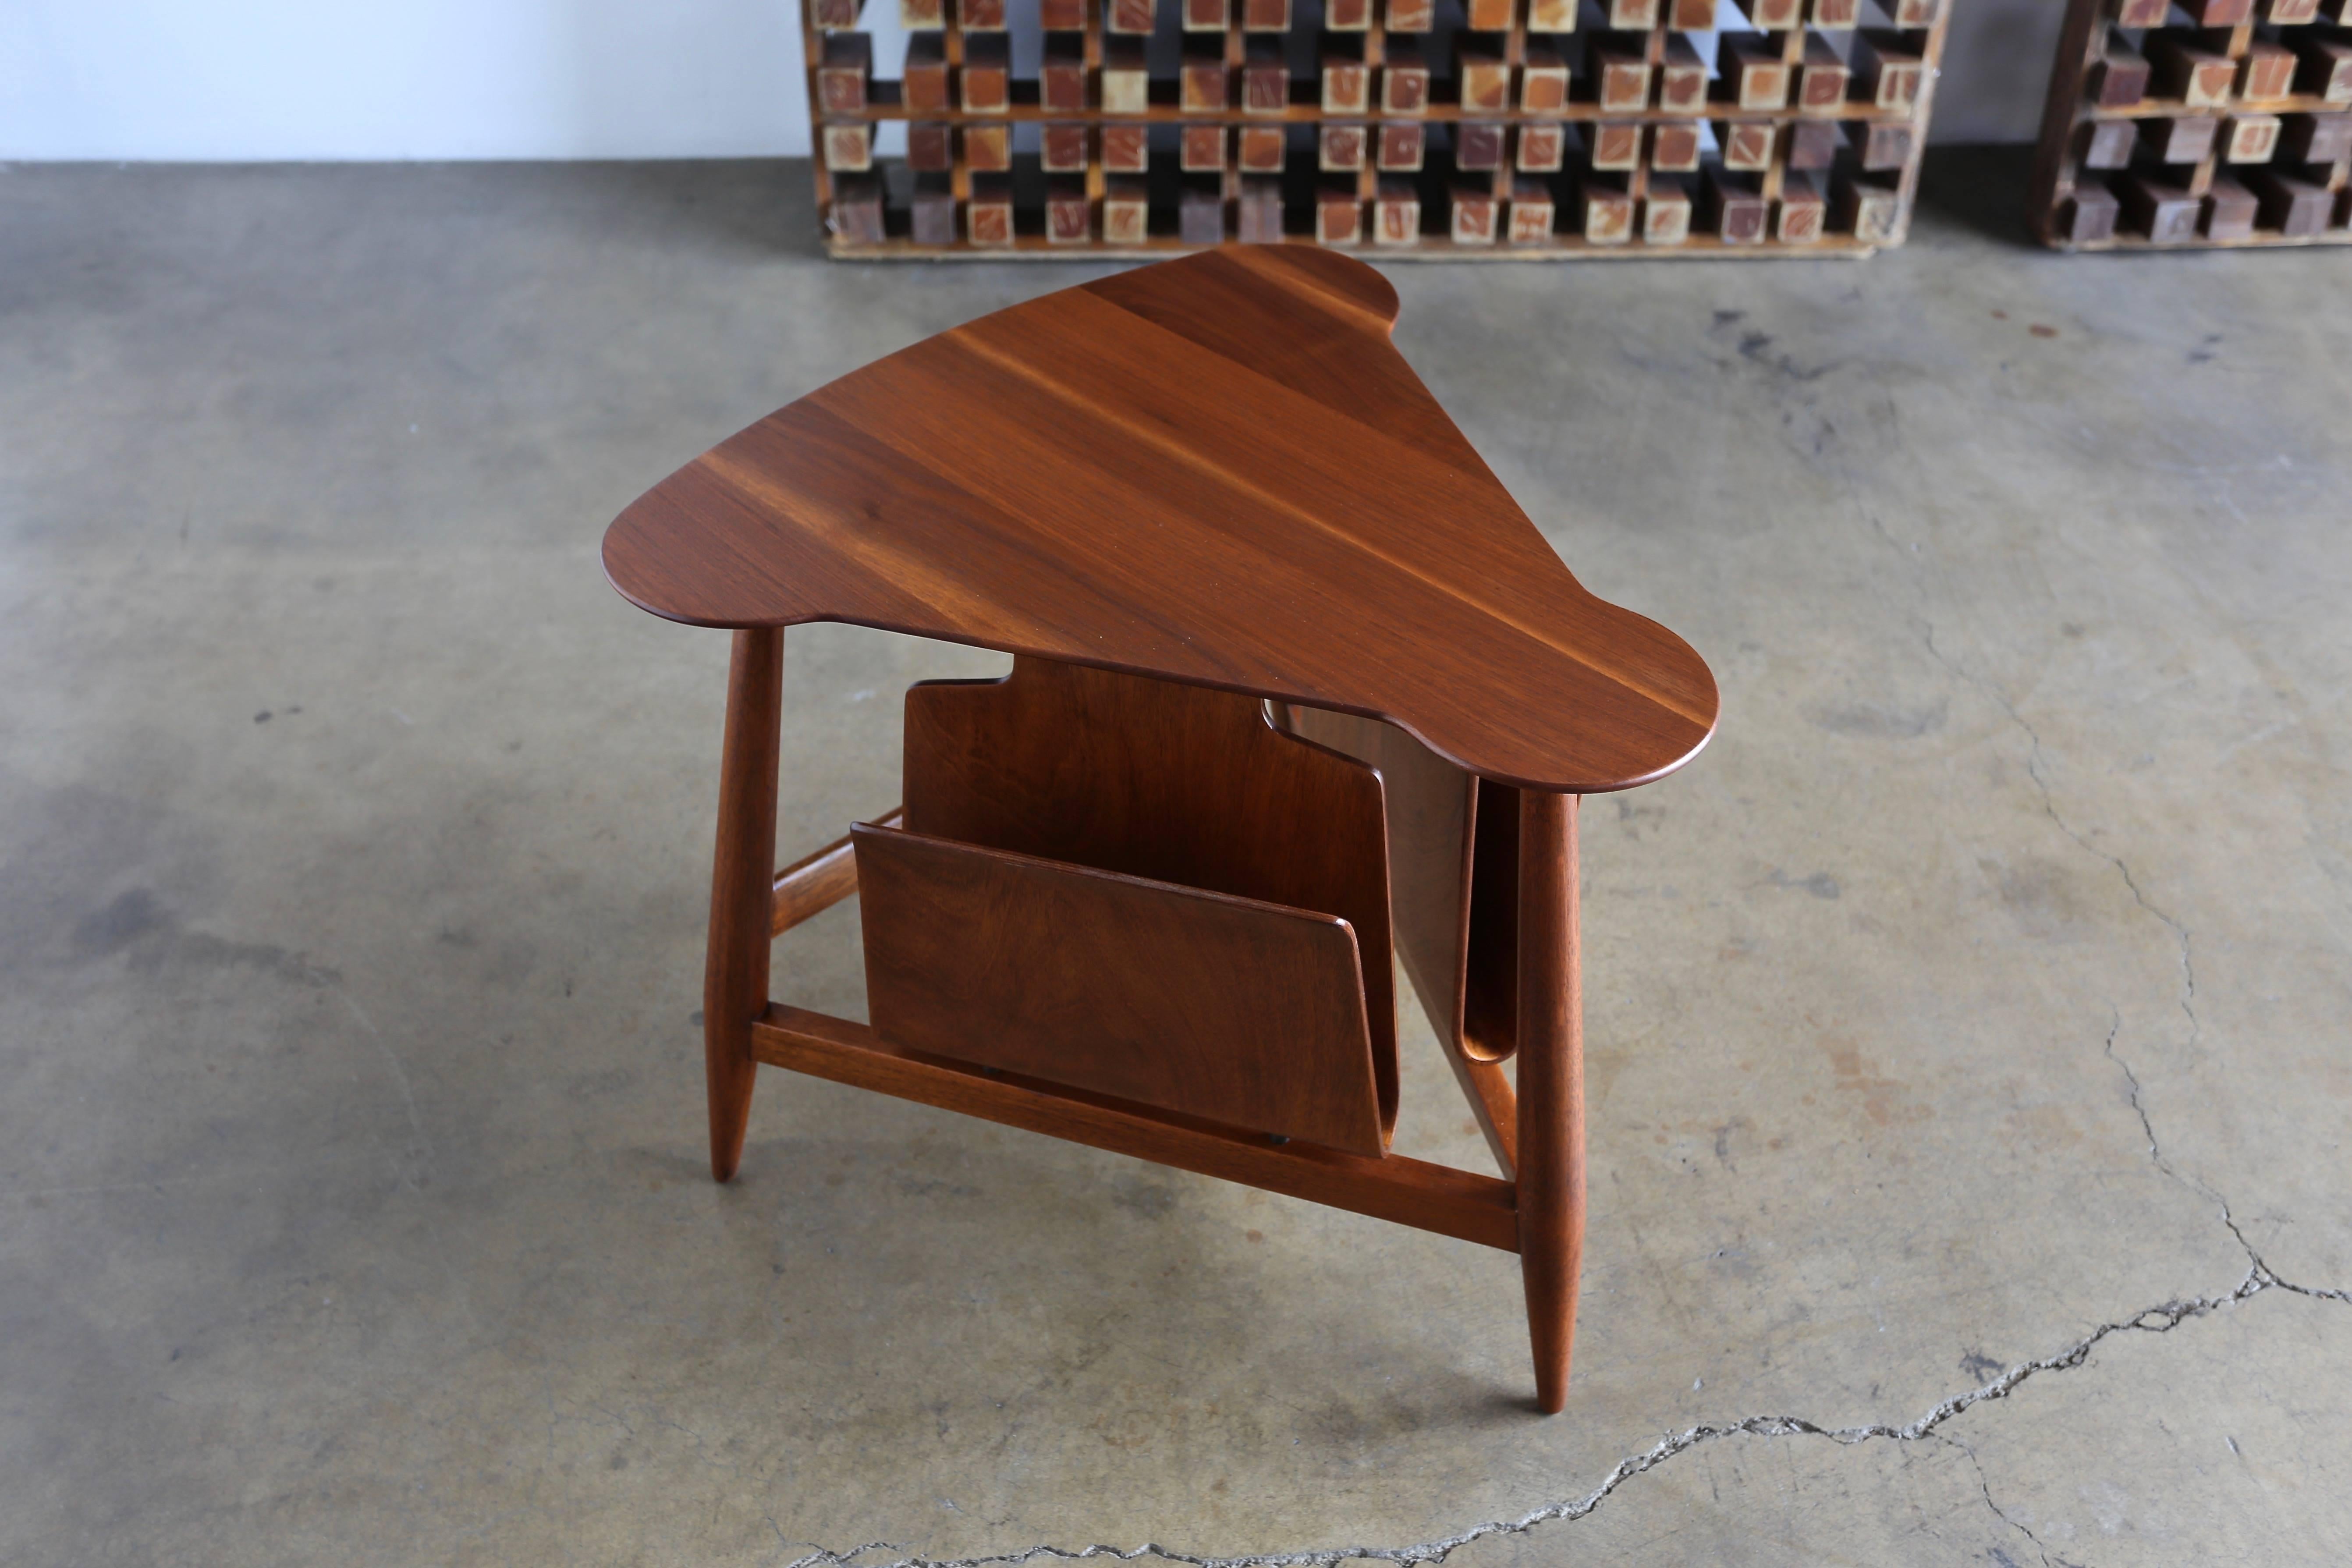 Edward Wormley magazine table model 5313. Manufactured by Dunbar, circa 1953. This table retains the original Dunbar tag to the bottom. This piece has been professionally restored.